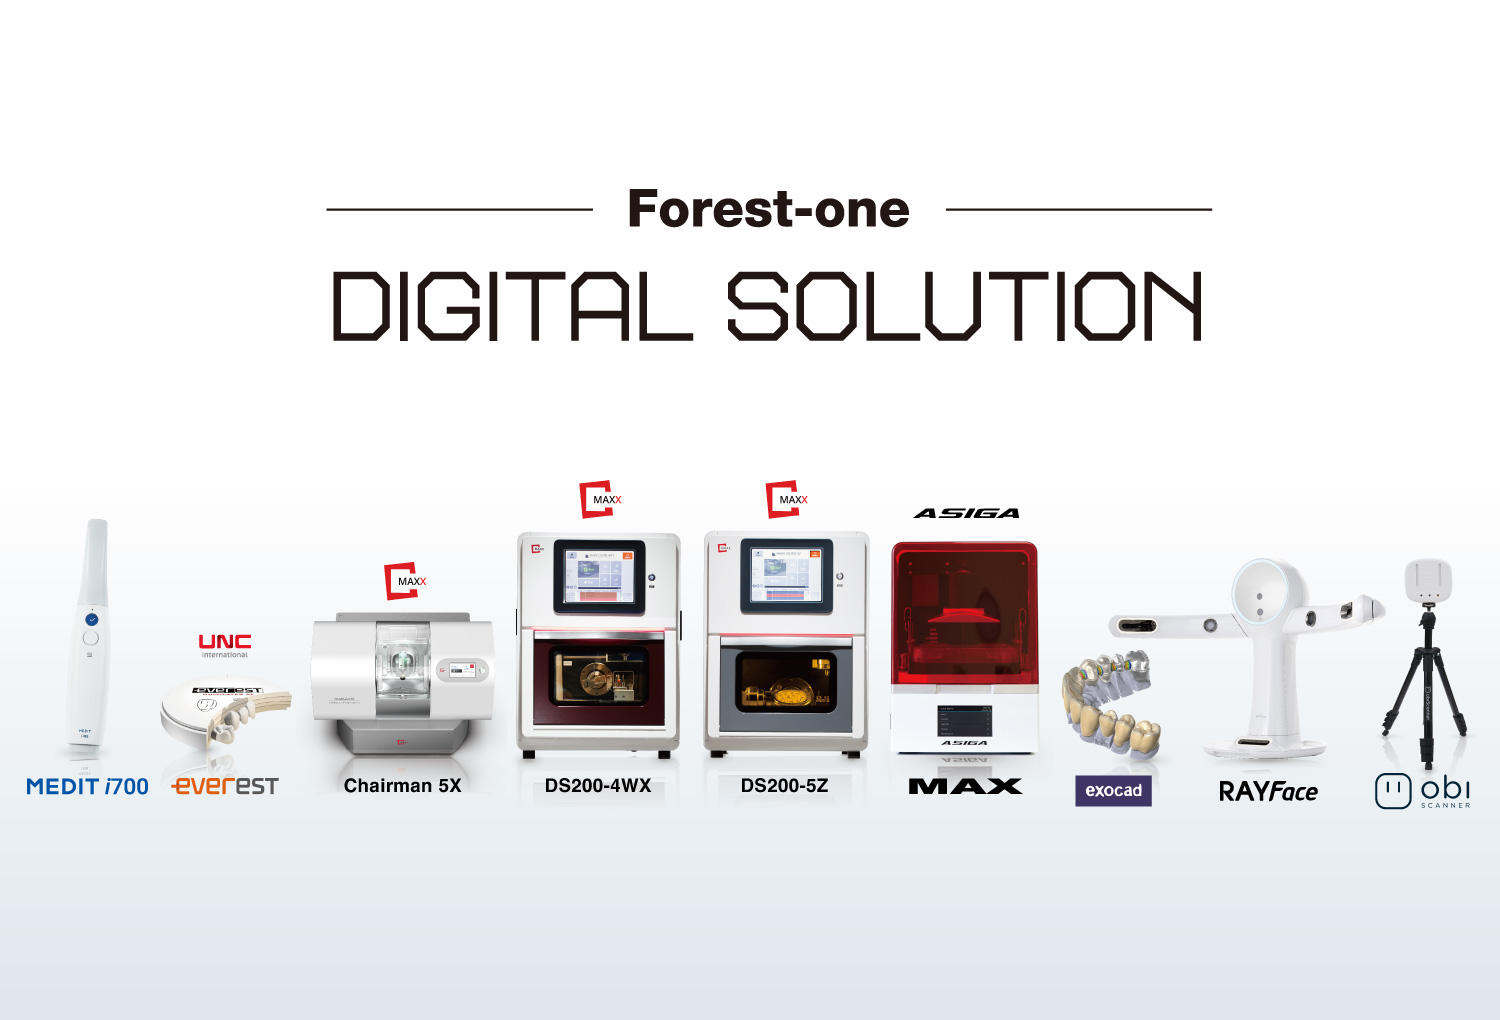 Forest-one Digital Solution